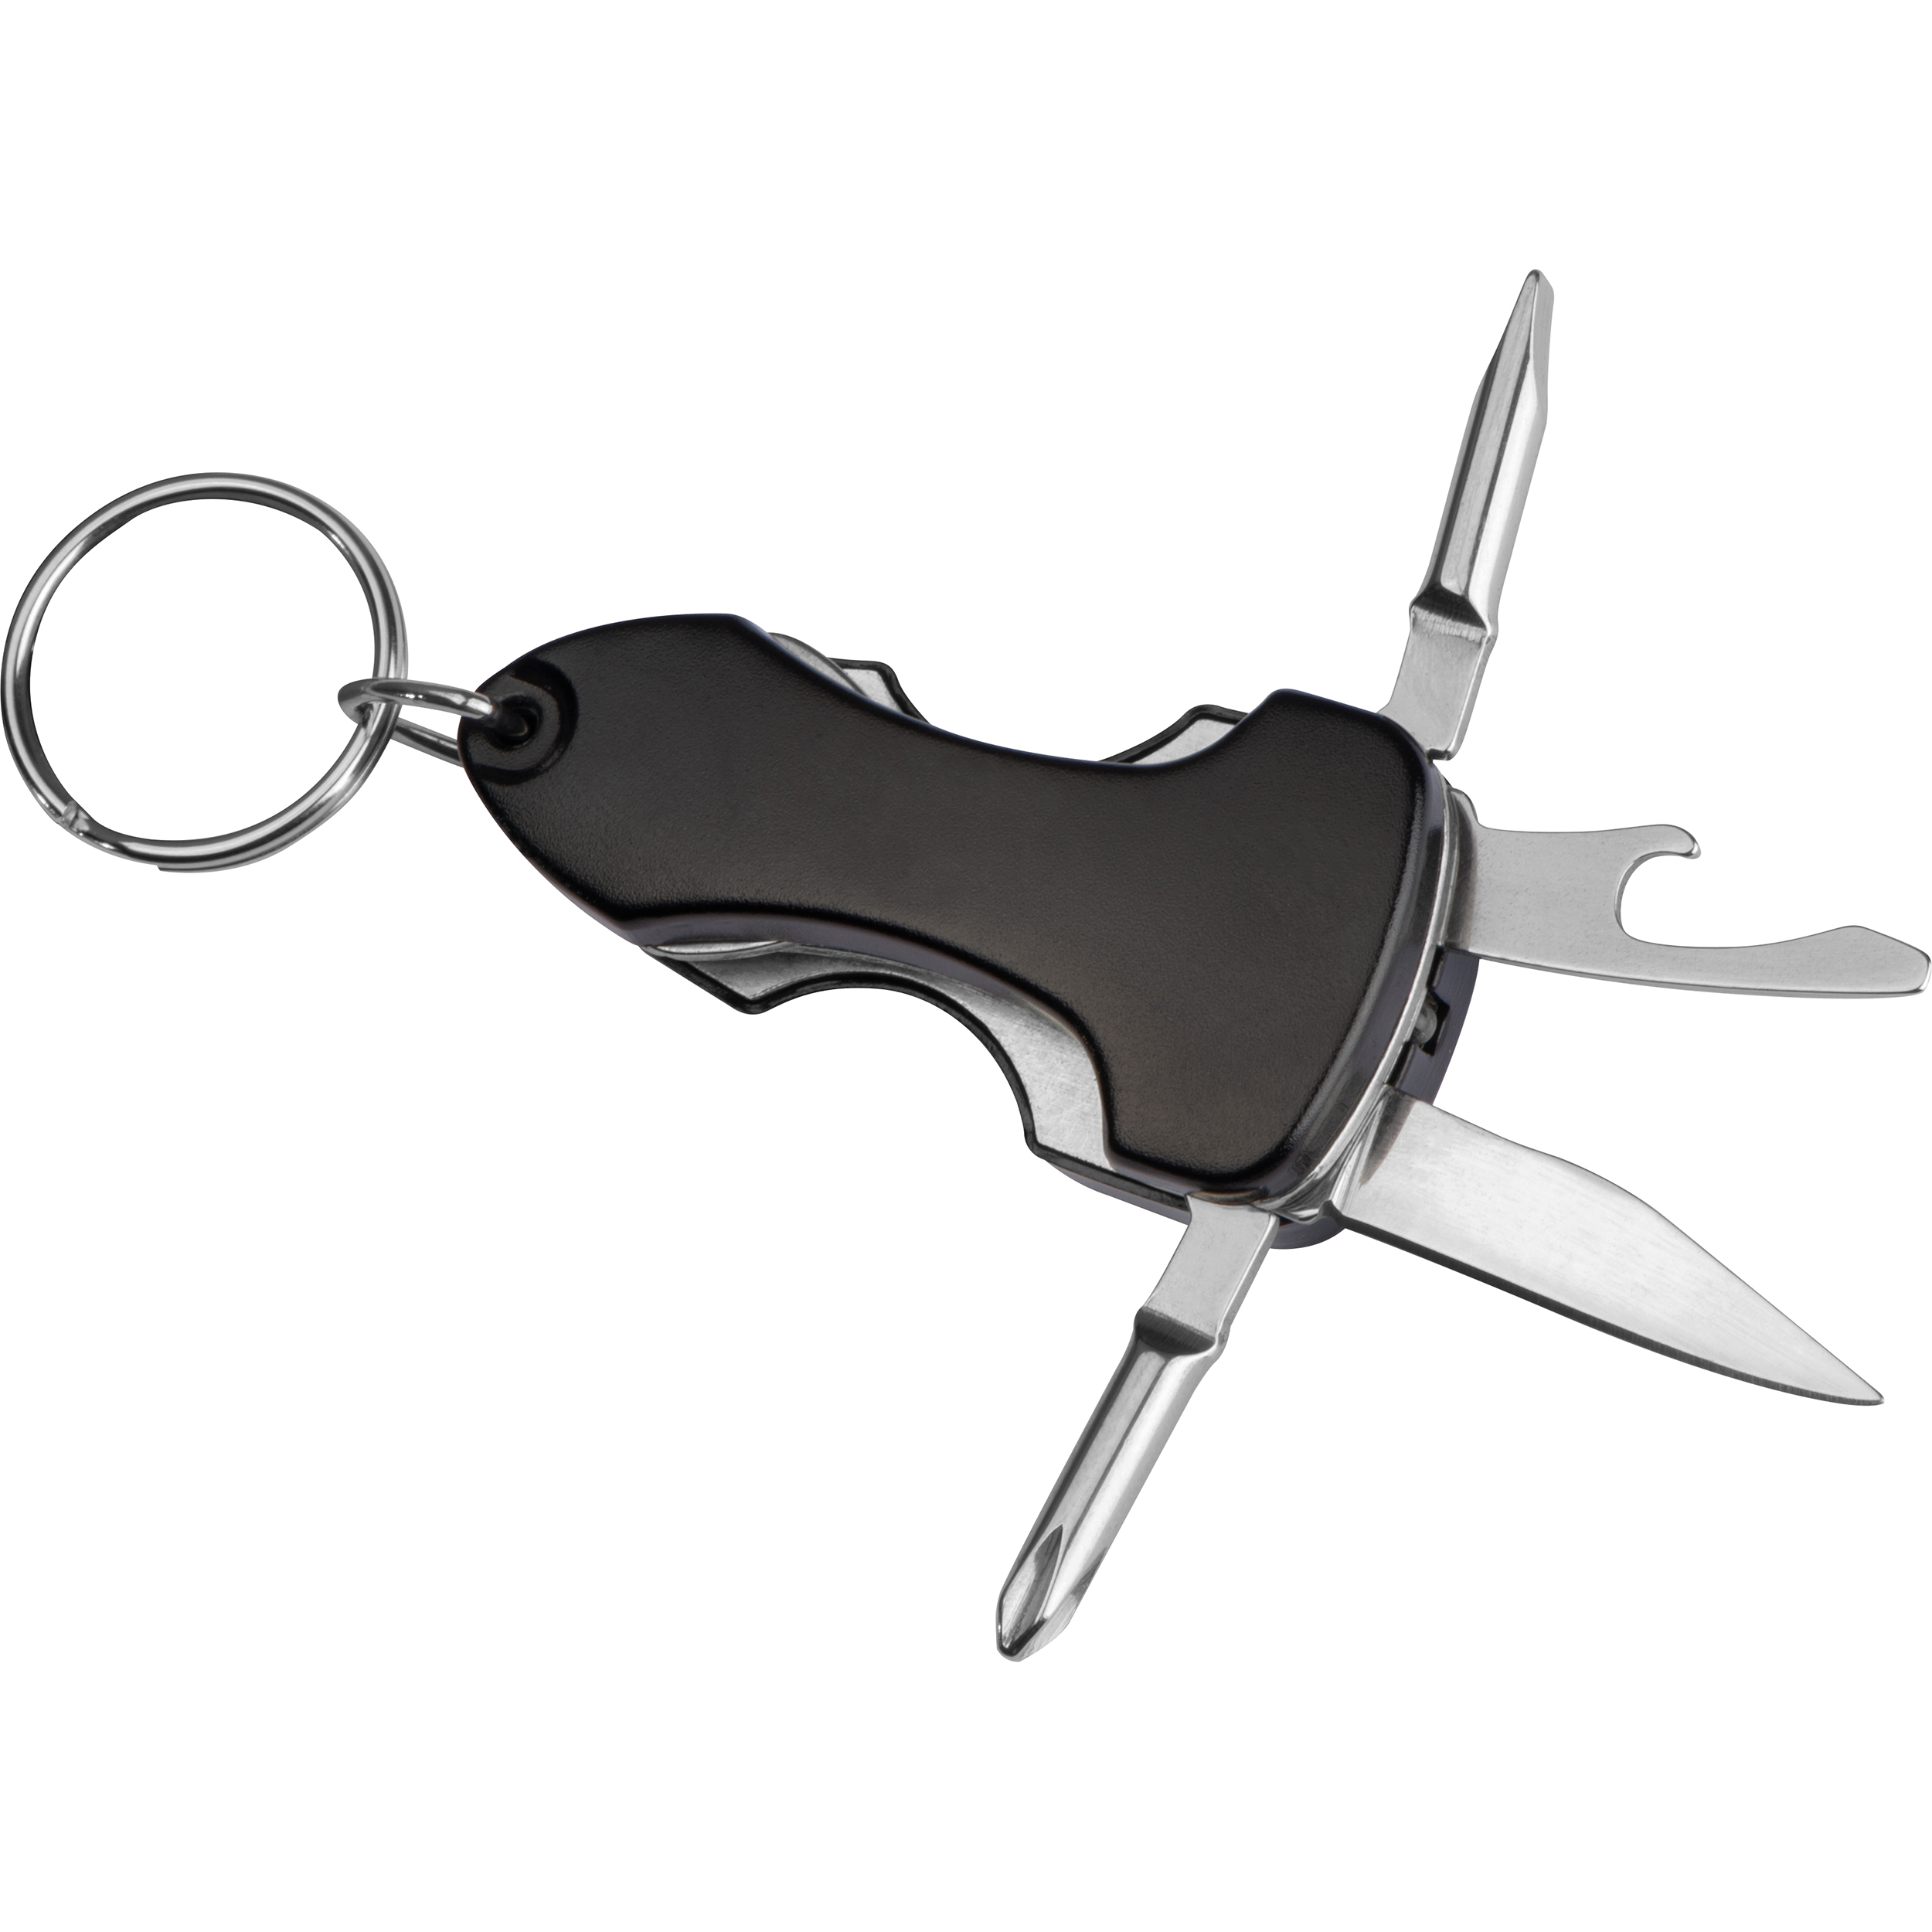 Engraved Metal Multitool Keychain - Bourton-on-the-Water - Abbots Langley